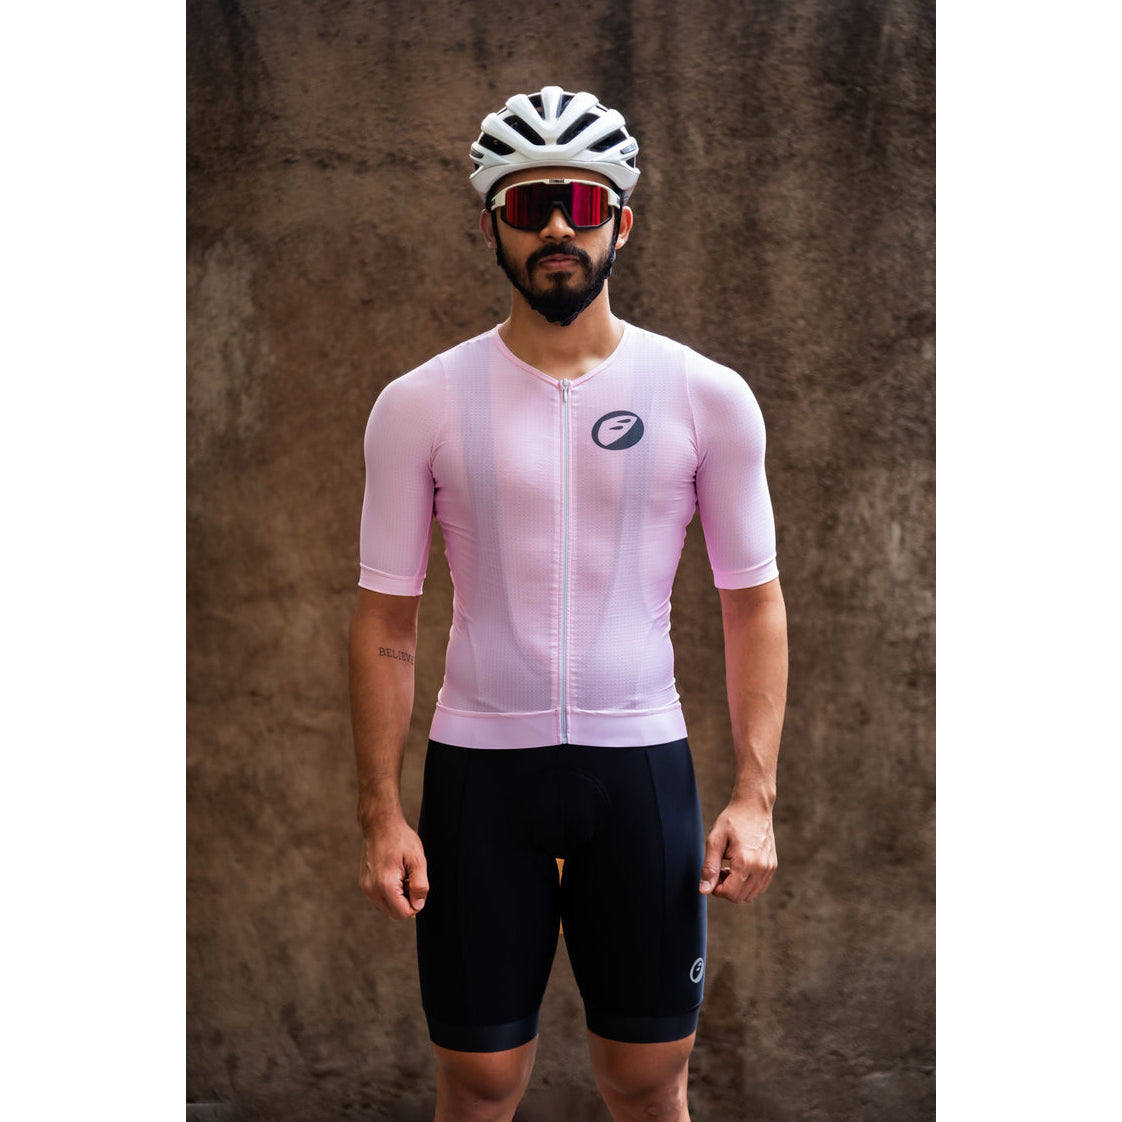 Apace Podium-Fit Mens Cycling Jersey - Bubblegum Pink - Cyclop.in